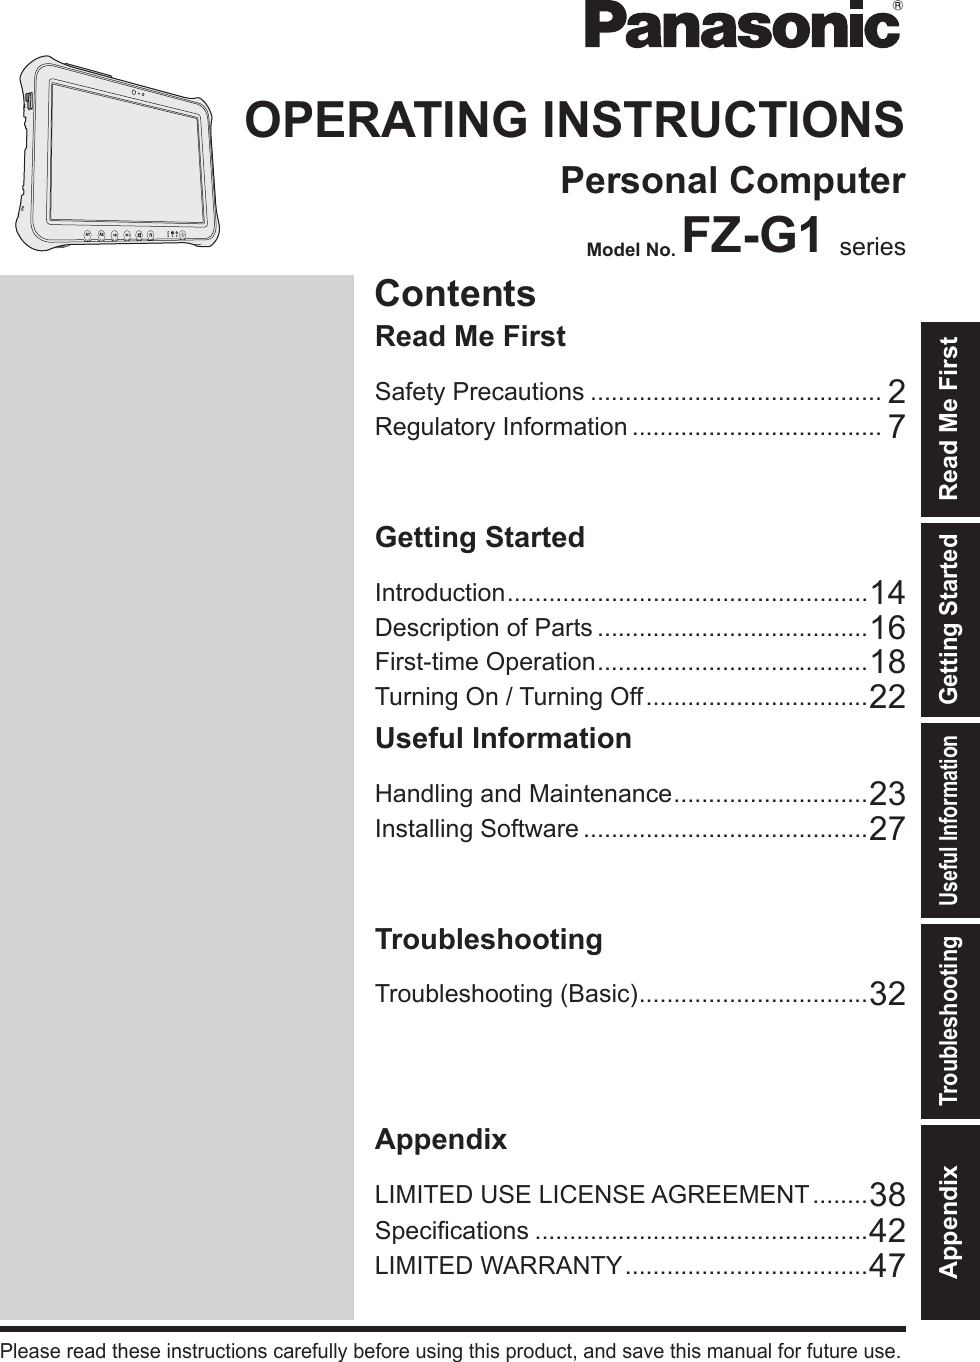 ContentsOPERATING INSTRUCTIONSPersonal ComputerModel No. FZ-G1 seriesIntroduction .................................................... 14Description of Parts .......................................16First-time Operation ....................................... 18Turning On / Turning Off ................................22Useful InformationHandling and Maintenance ............................ 23Installing Software .........................................27TroubleshootingTroubleshooting (Basic) ................................. 32AppendixLIMITED USE LICENSE AGREEMENT ........38Specications ................................................42LIMITED WARRANTY ...................................47Please read these instructions carefully before using this product, and save this manual for future use.Getting StartedUseful InformationTroubleshootingAppendix Read Me FirstGetting StartedSafety Precautions .......................................... 2Regulatory Information .................................... 7Read Me FirstA2A1DFQW5716ZAT_FZ-G1mk1_8_7_OI_M.indb   1 2013/01/11   17:13:37